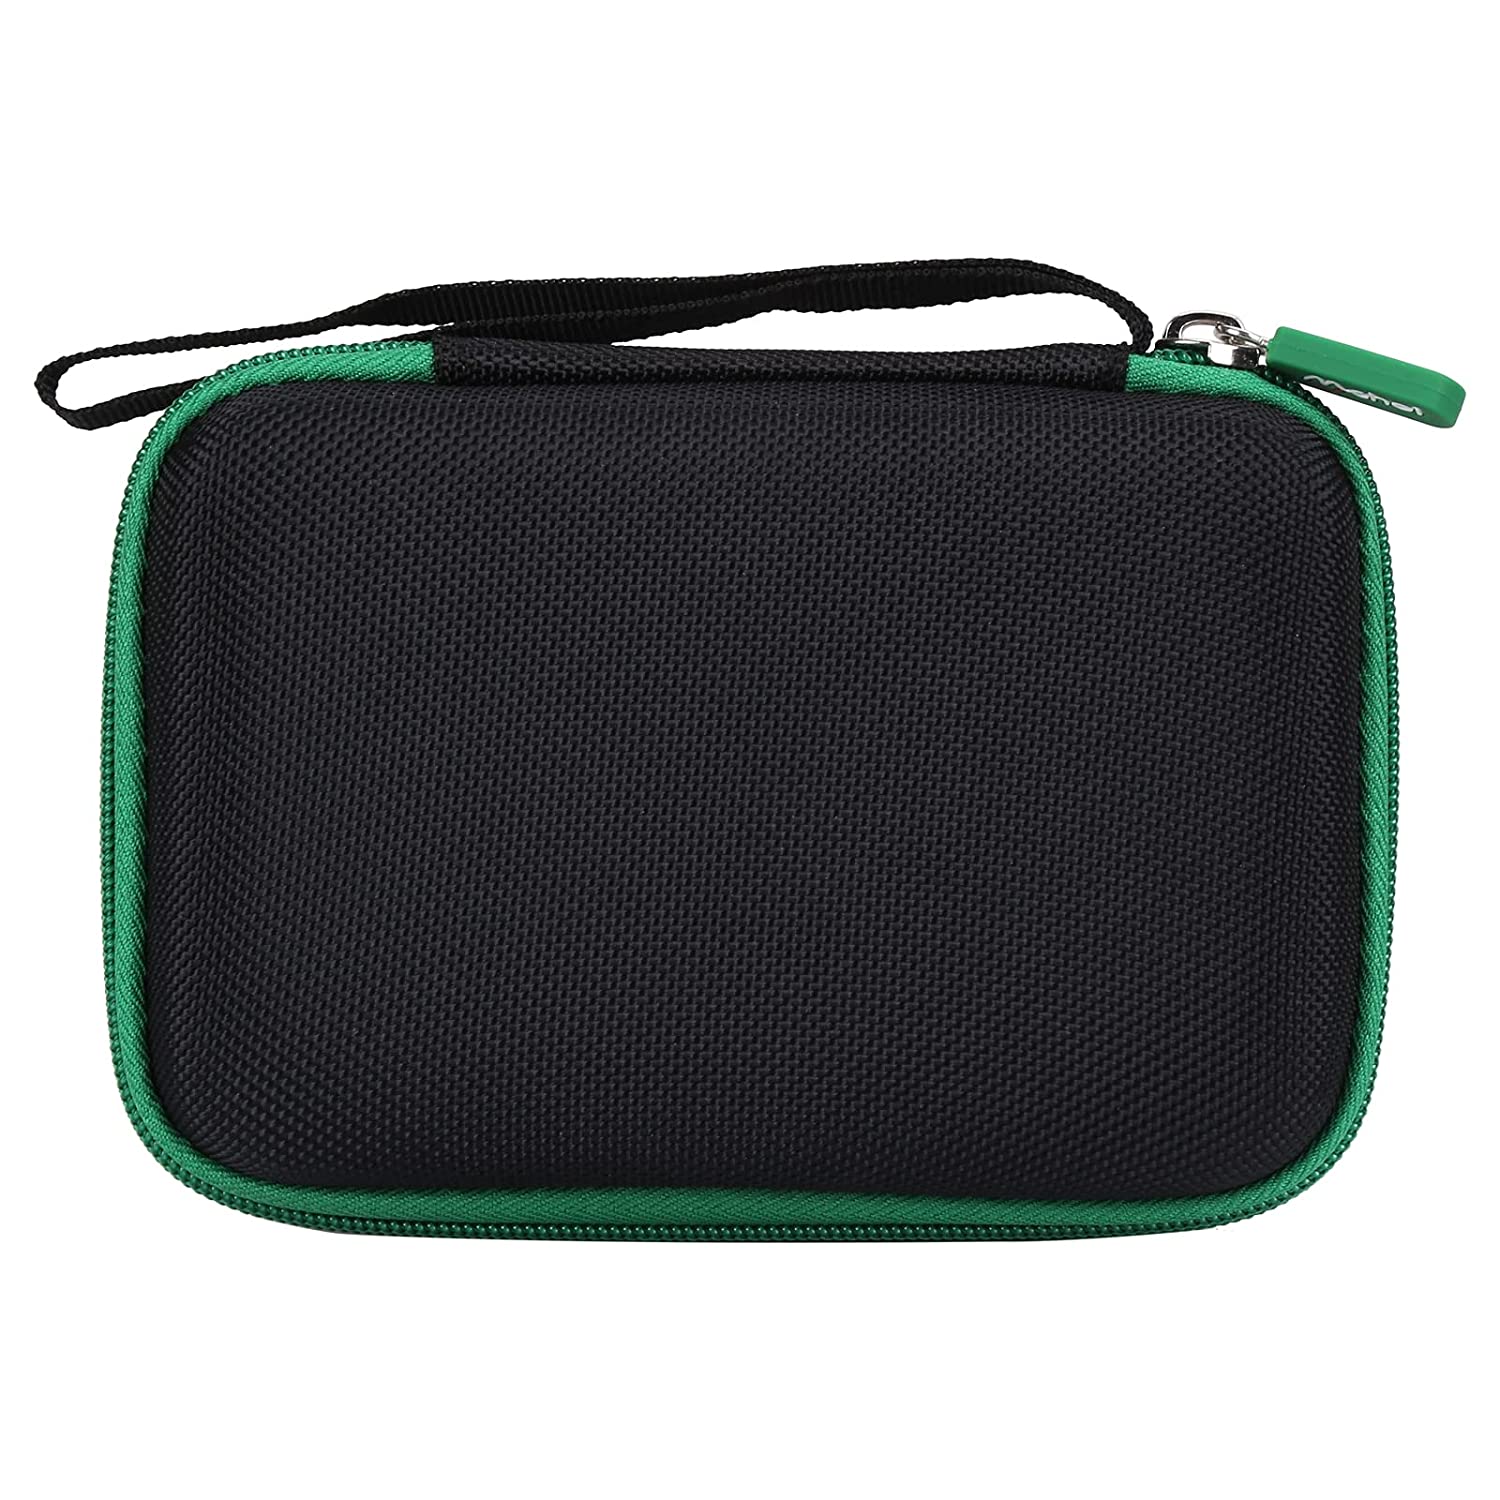 Mchoi Shockproof Carrying Case